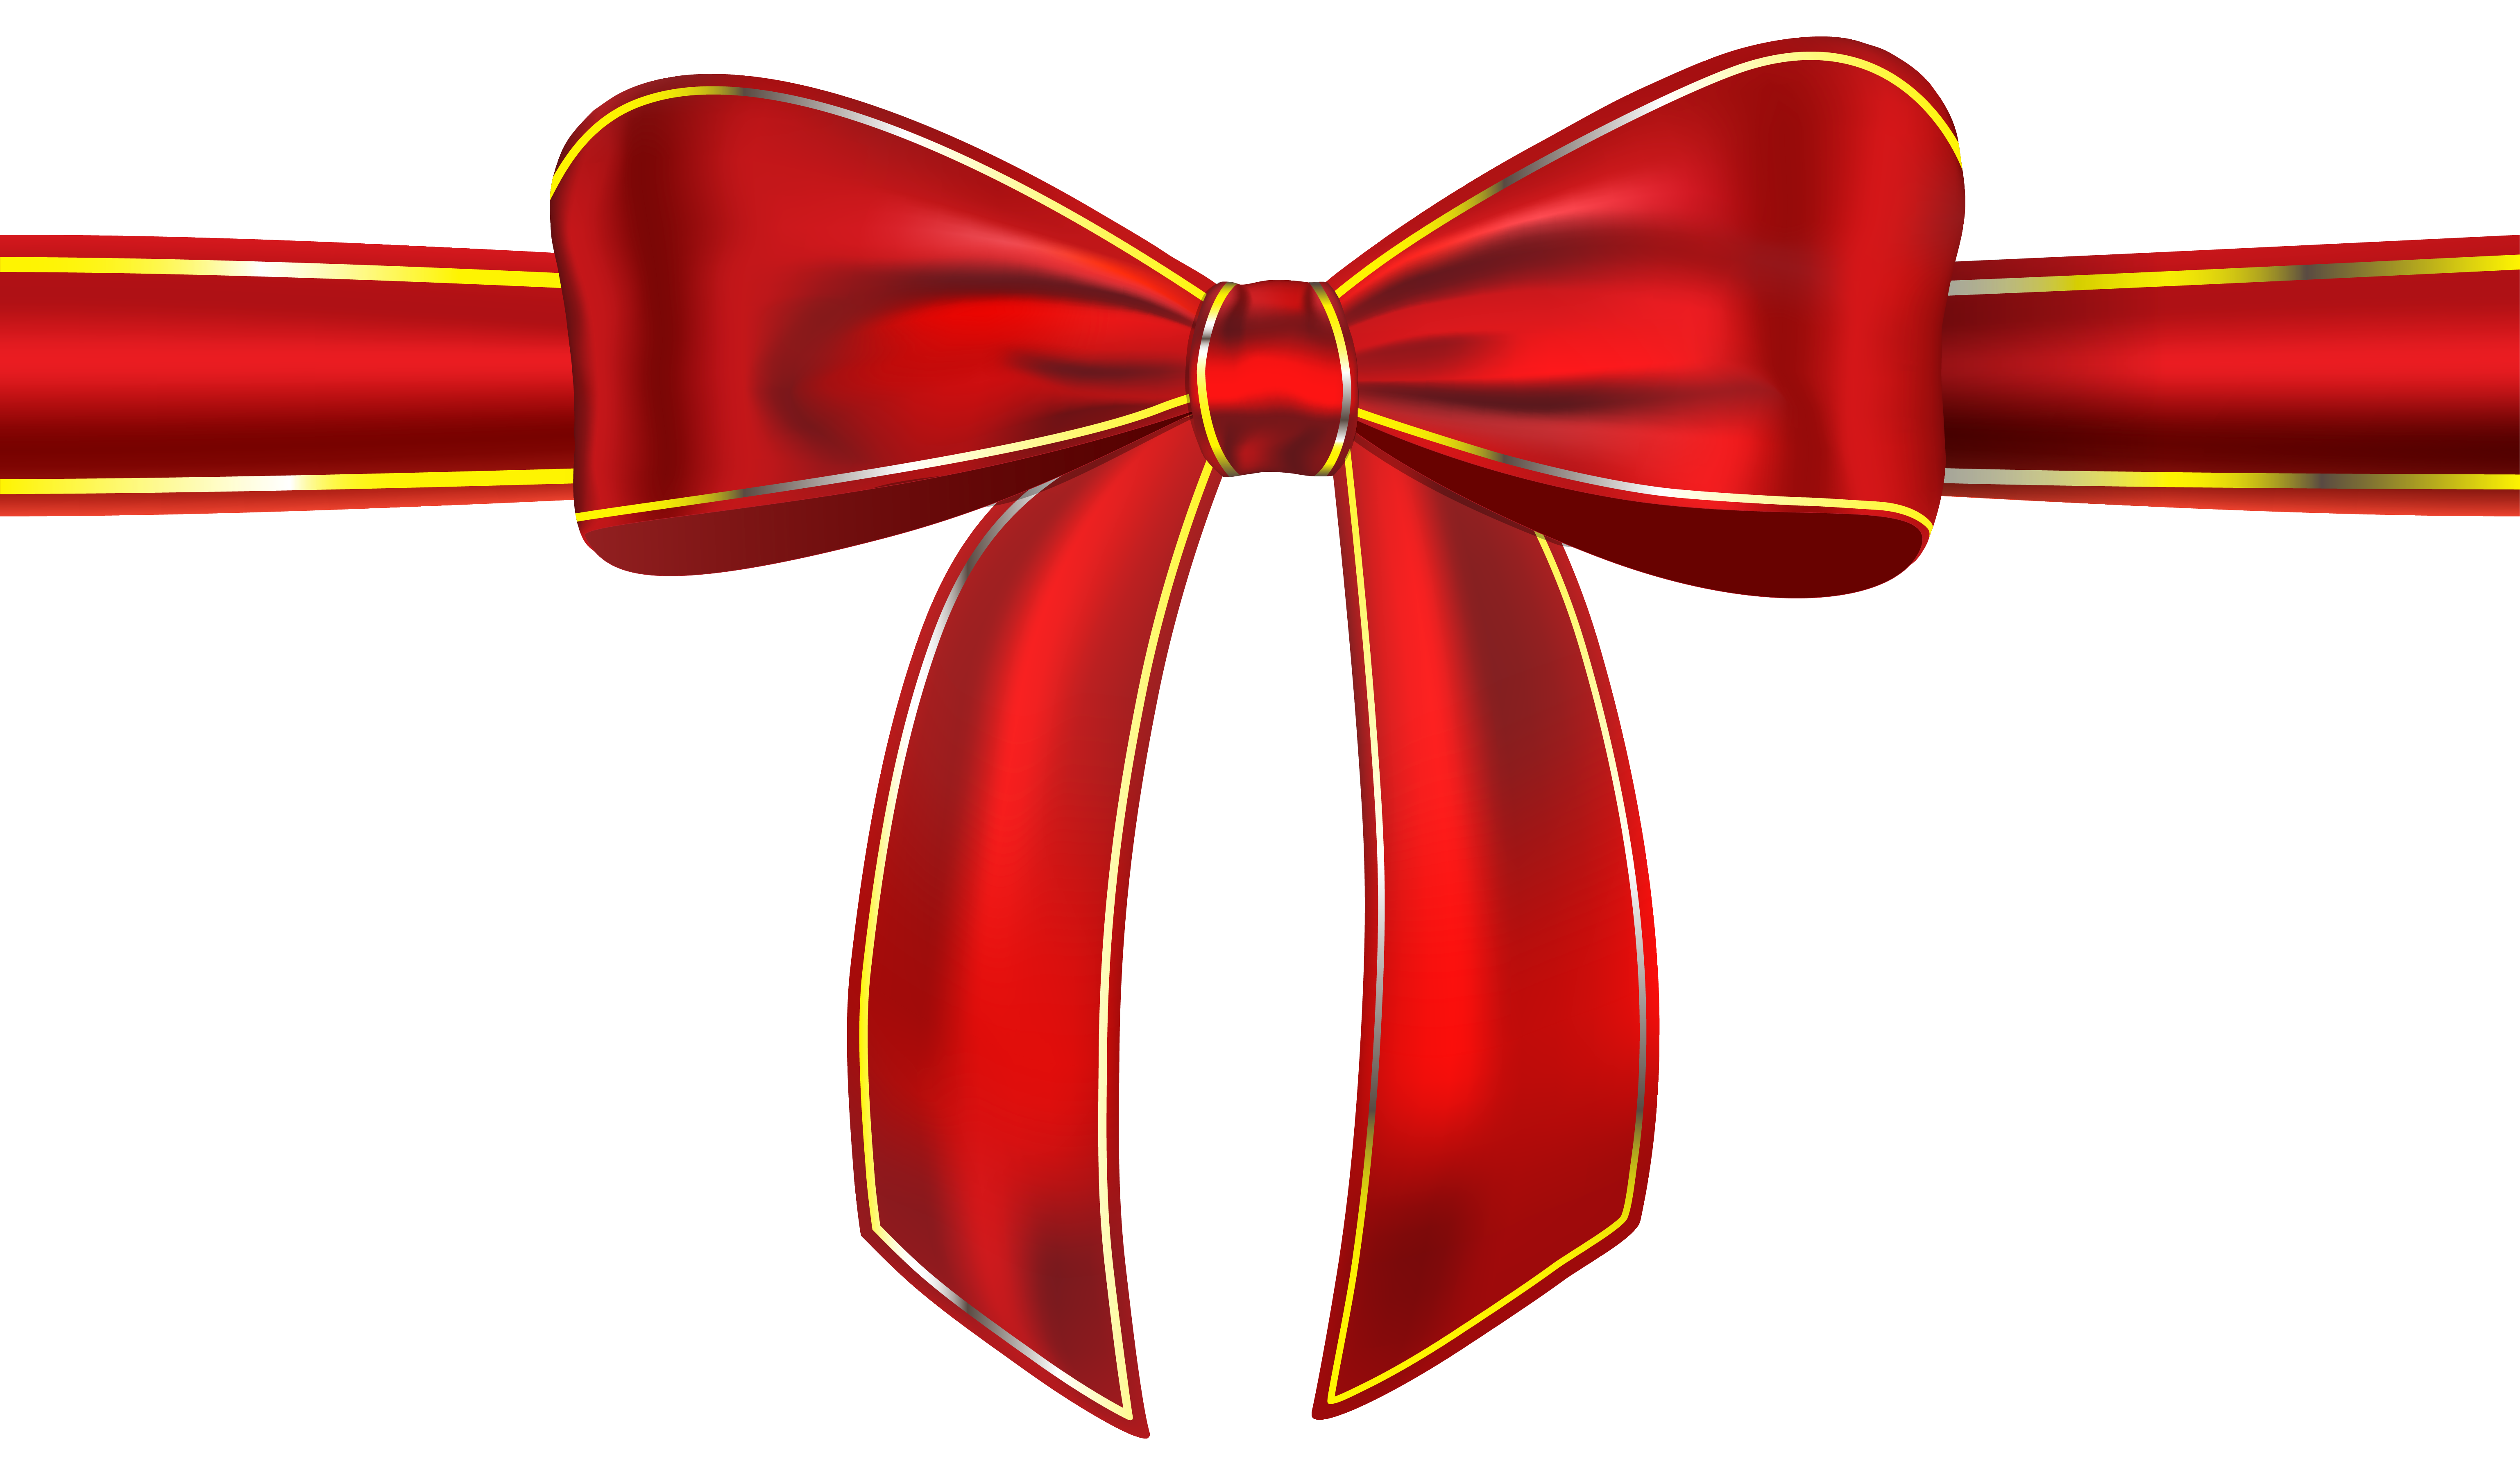 Red Ribbon with Bow PNG Clipart Picture | Gallery Yopriceville ...